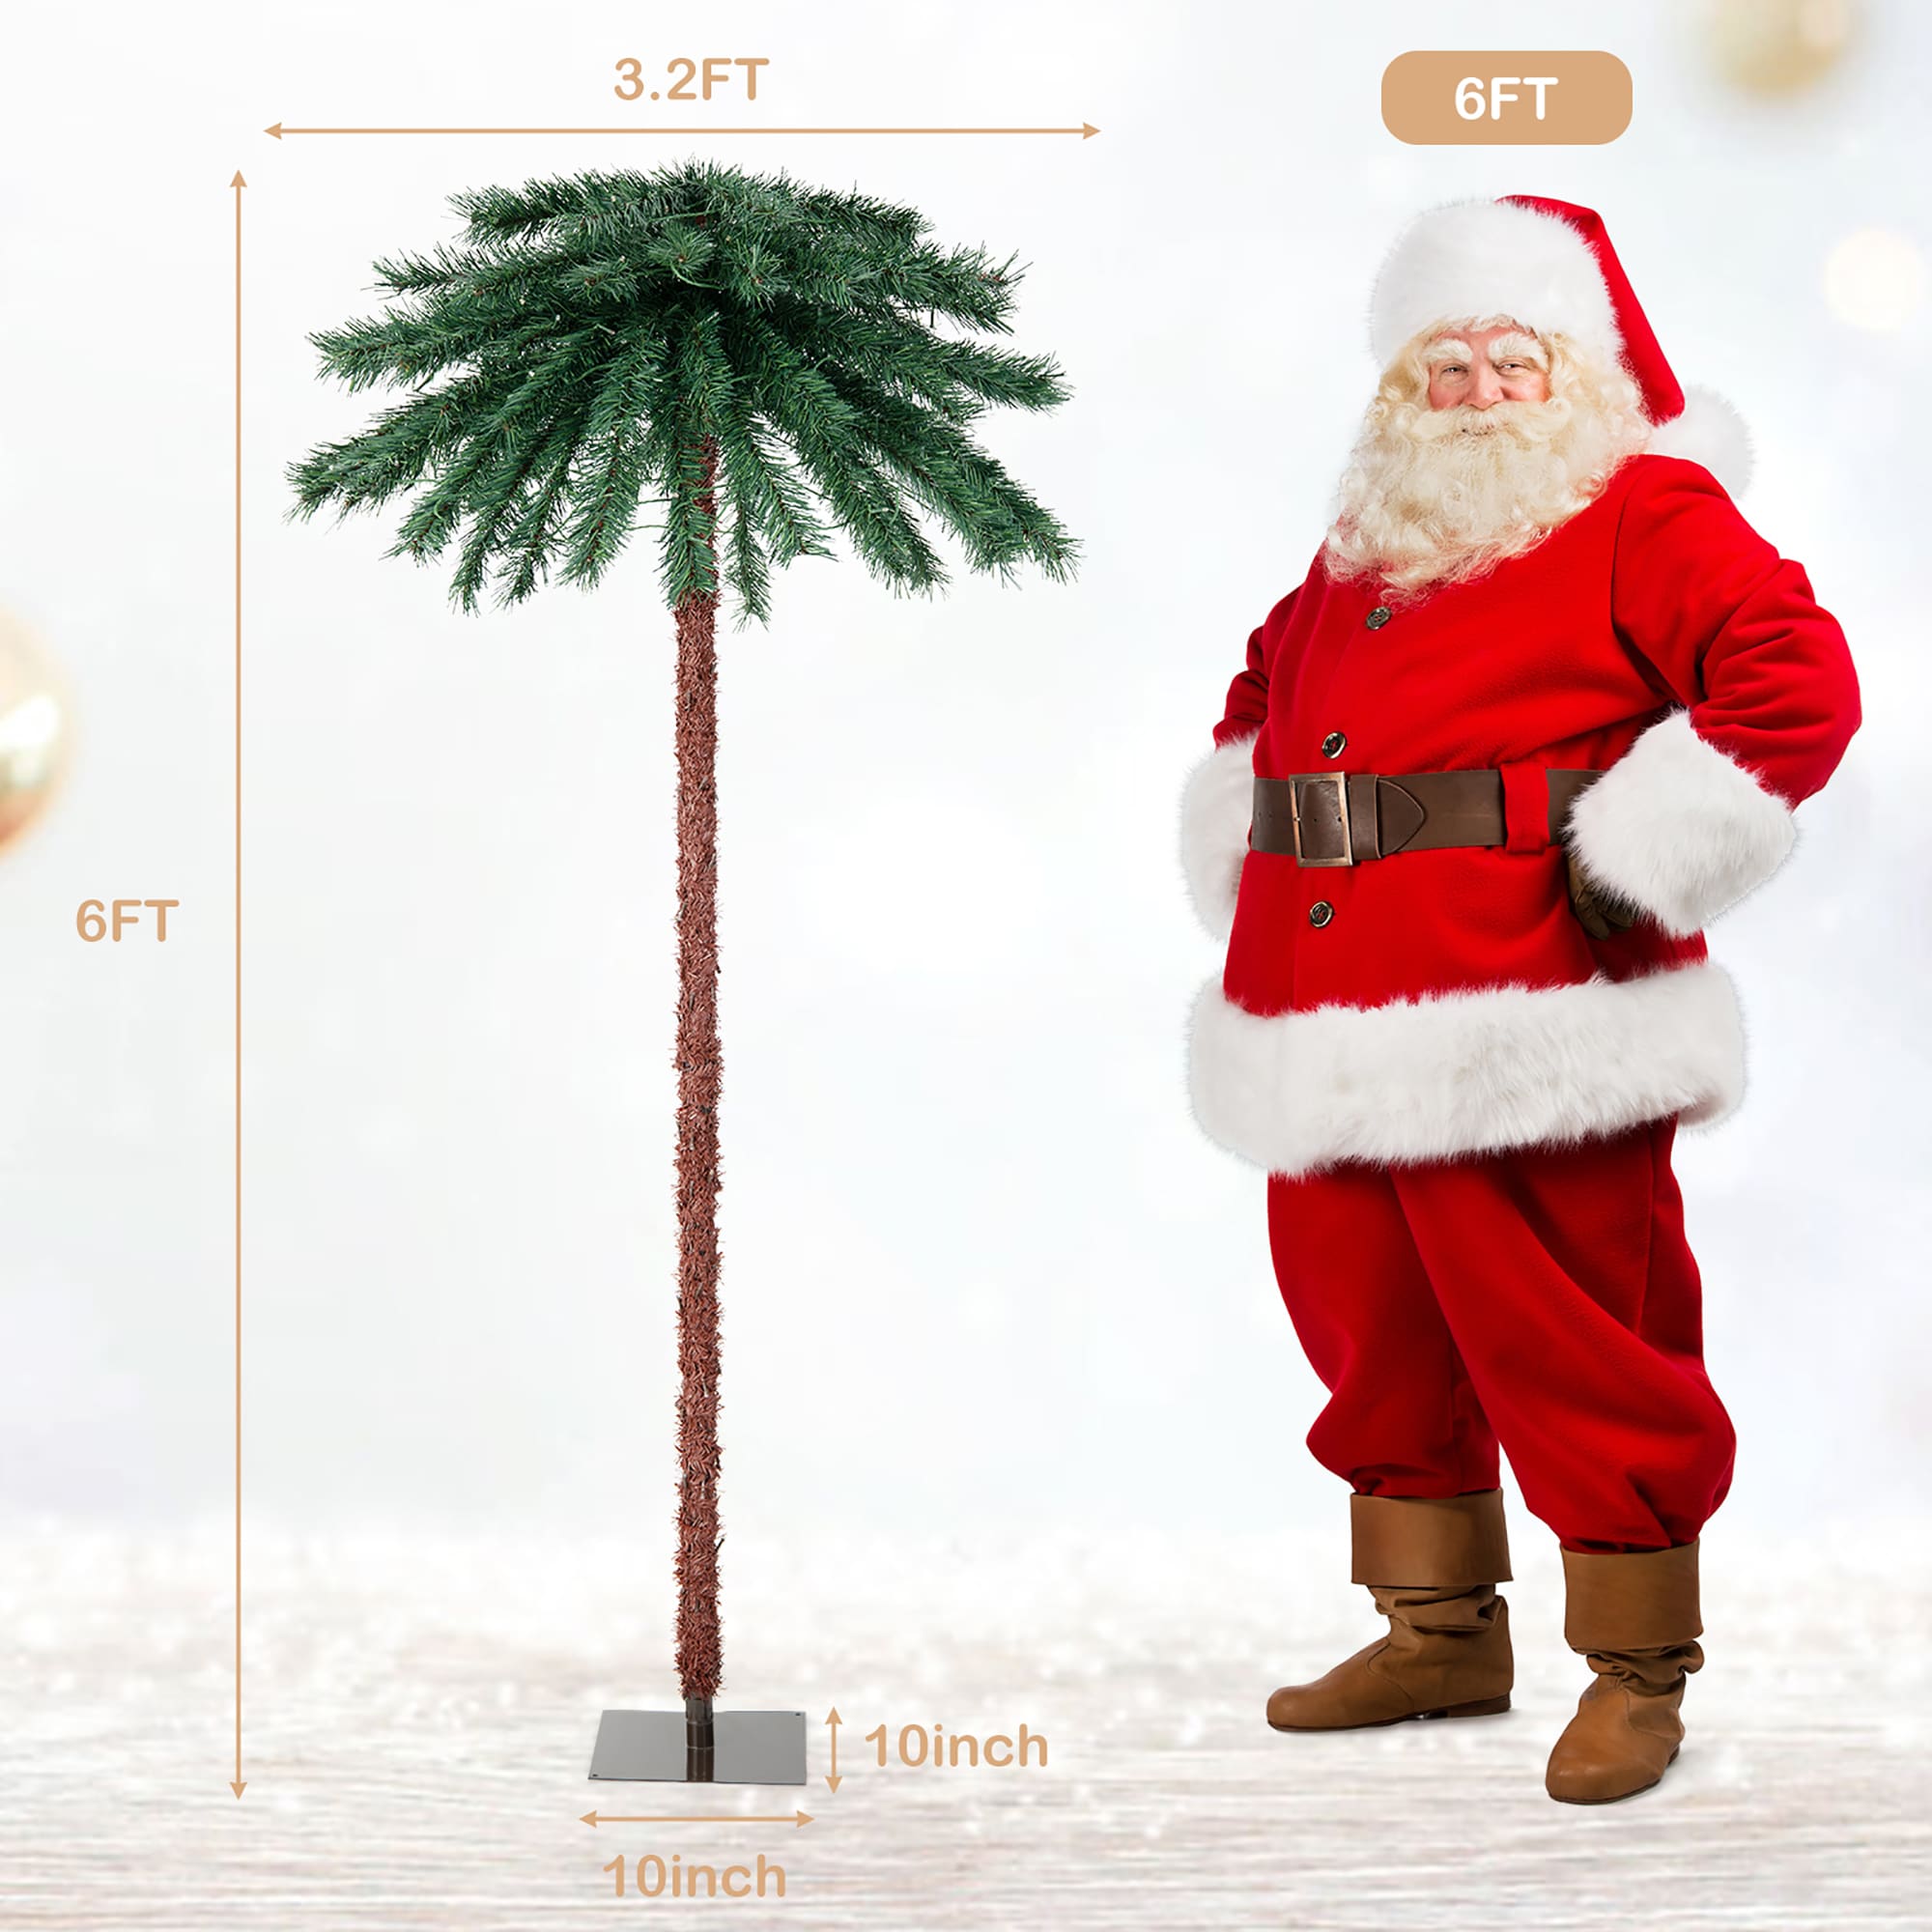 Goplus 6-ft Pre-lit Slim Artificial Christmas Tree with LED Lights in ...